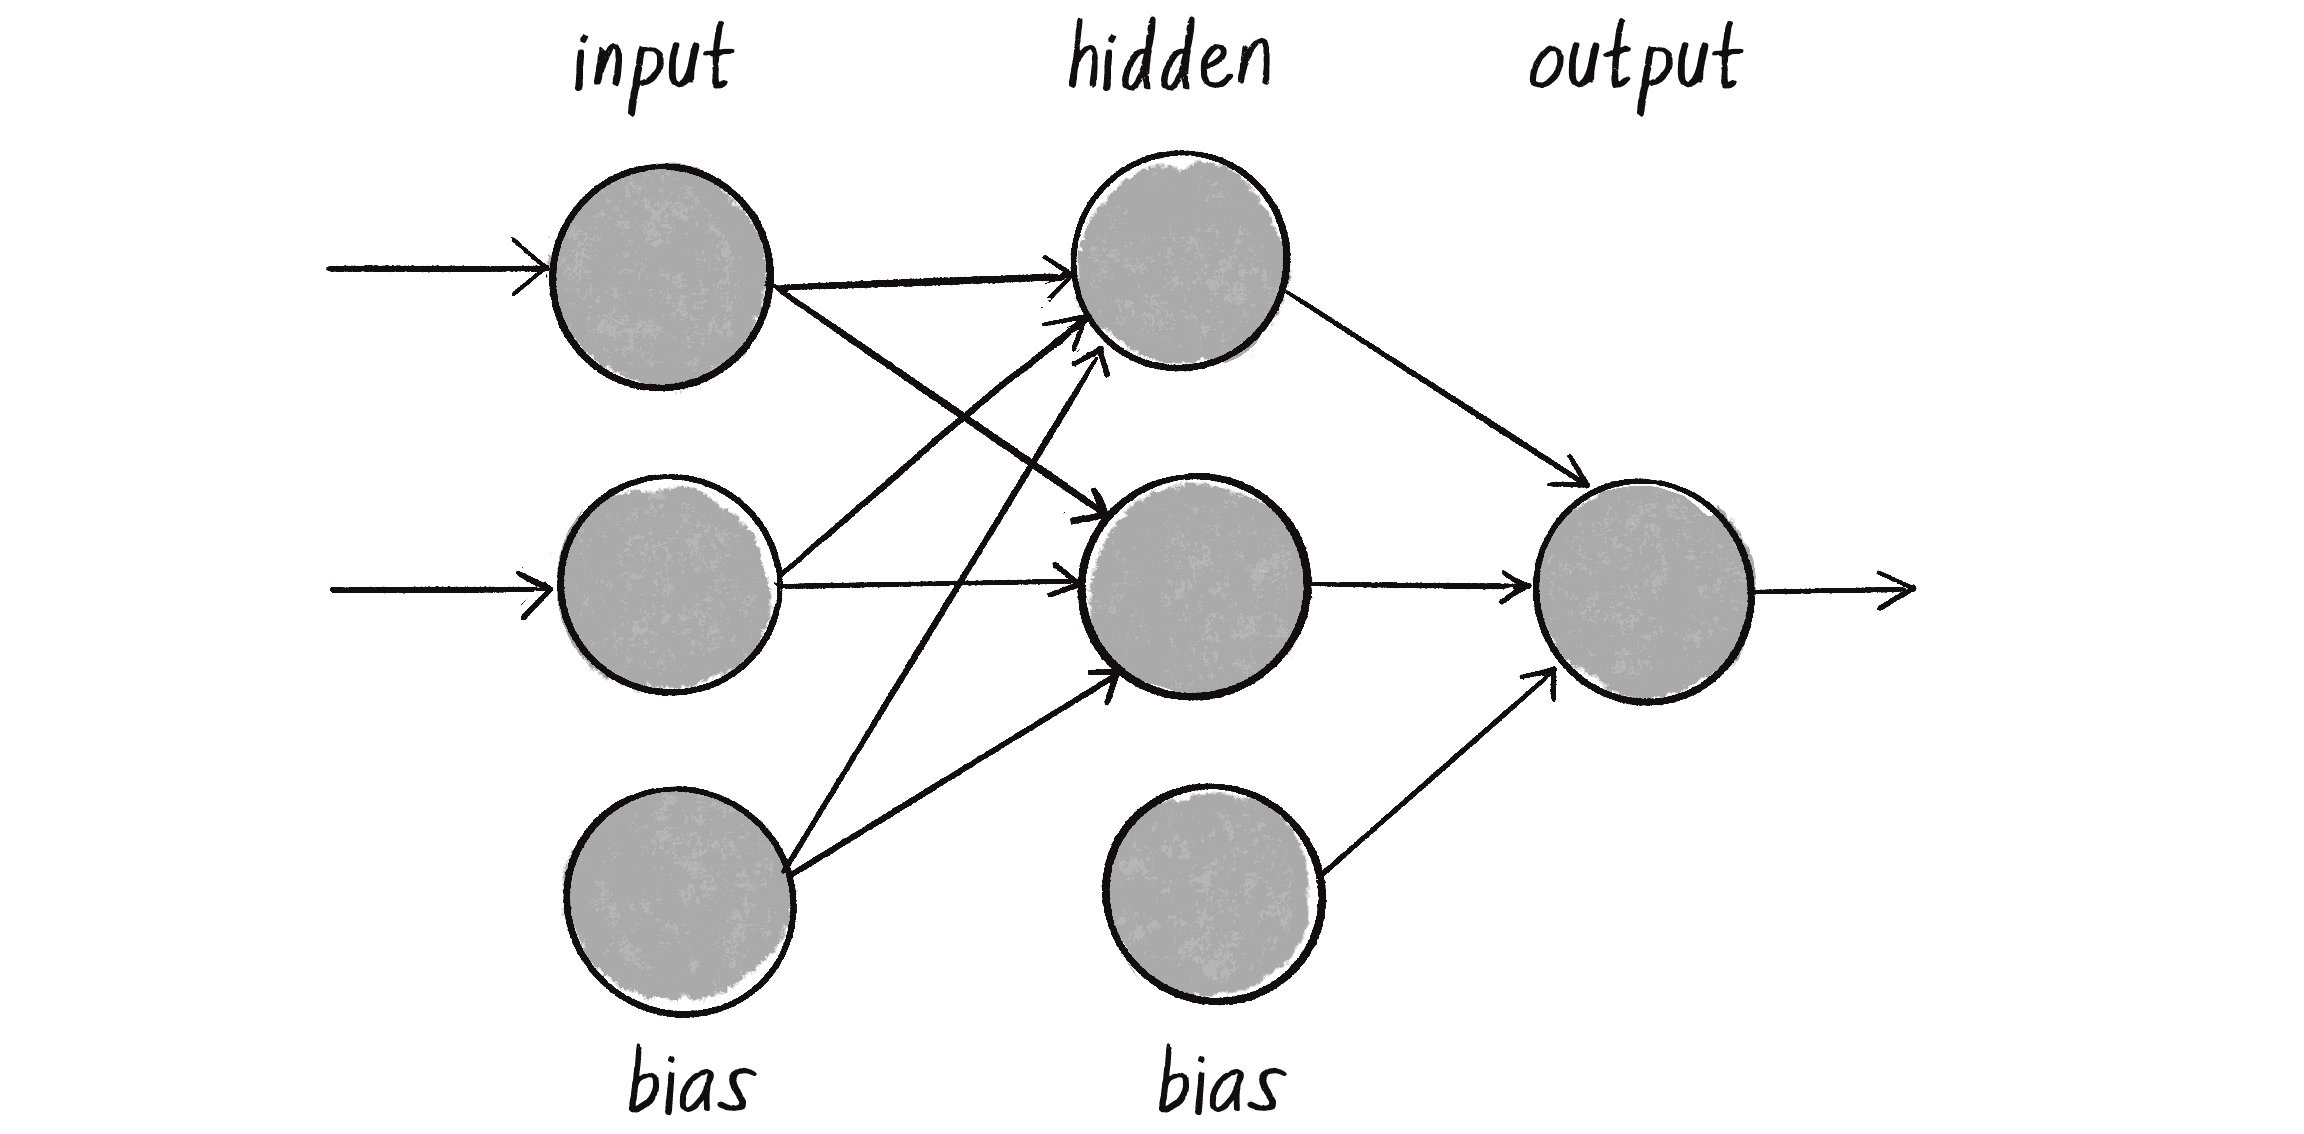 Figure 10.13: A multilayered perceptron has the same inputs and output as the simple perceptron, but now it includes a hidden layer of neurons.